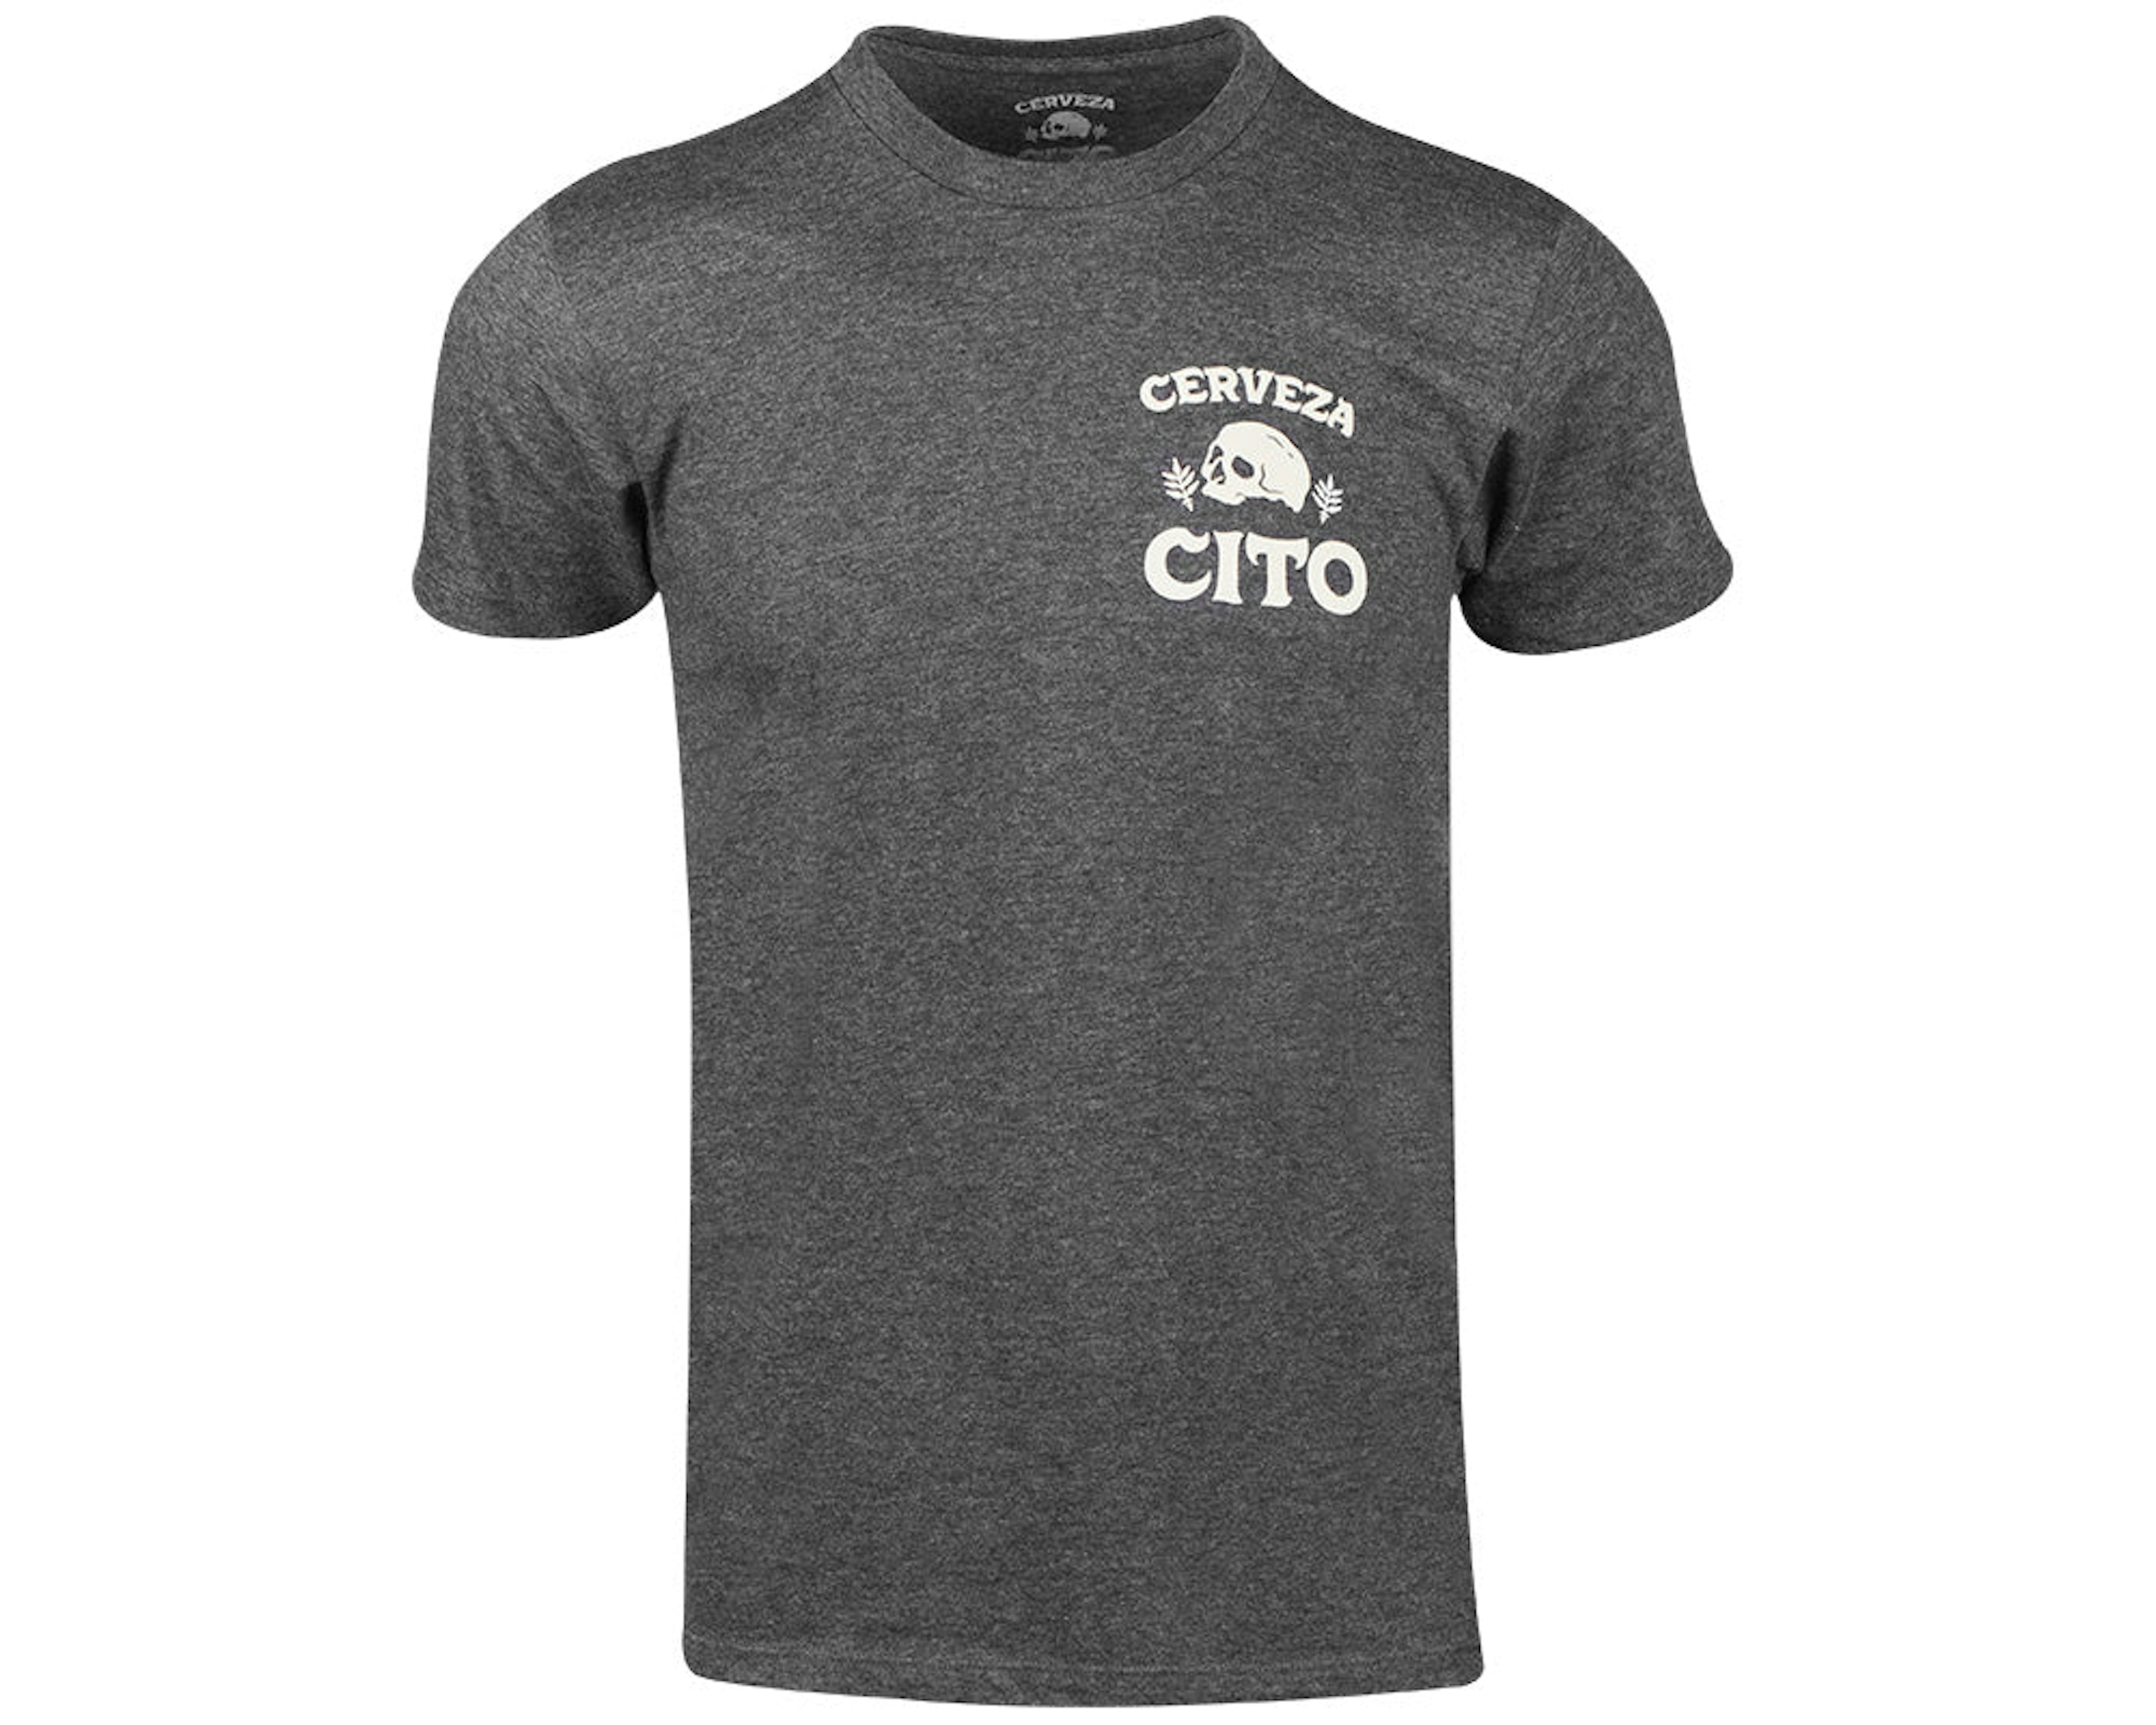 Cerveza Cito Tee - Charcoal Heather Front